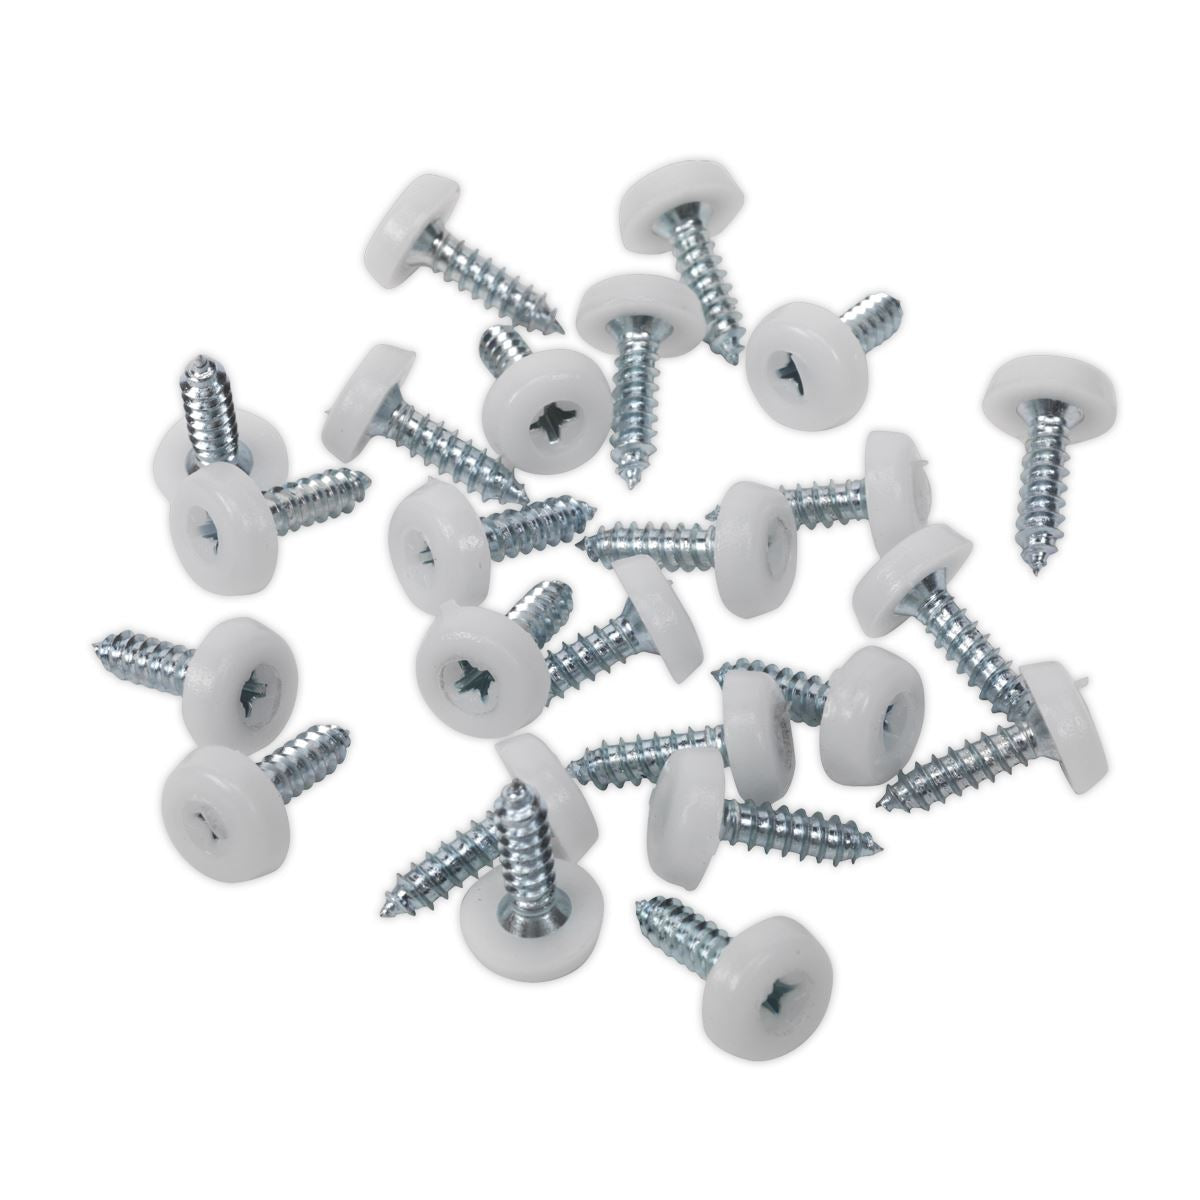 Sealey Numberplate Screw Plastic Enclosed Head 4.8 x 18mm White Pack of 50